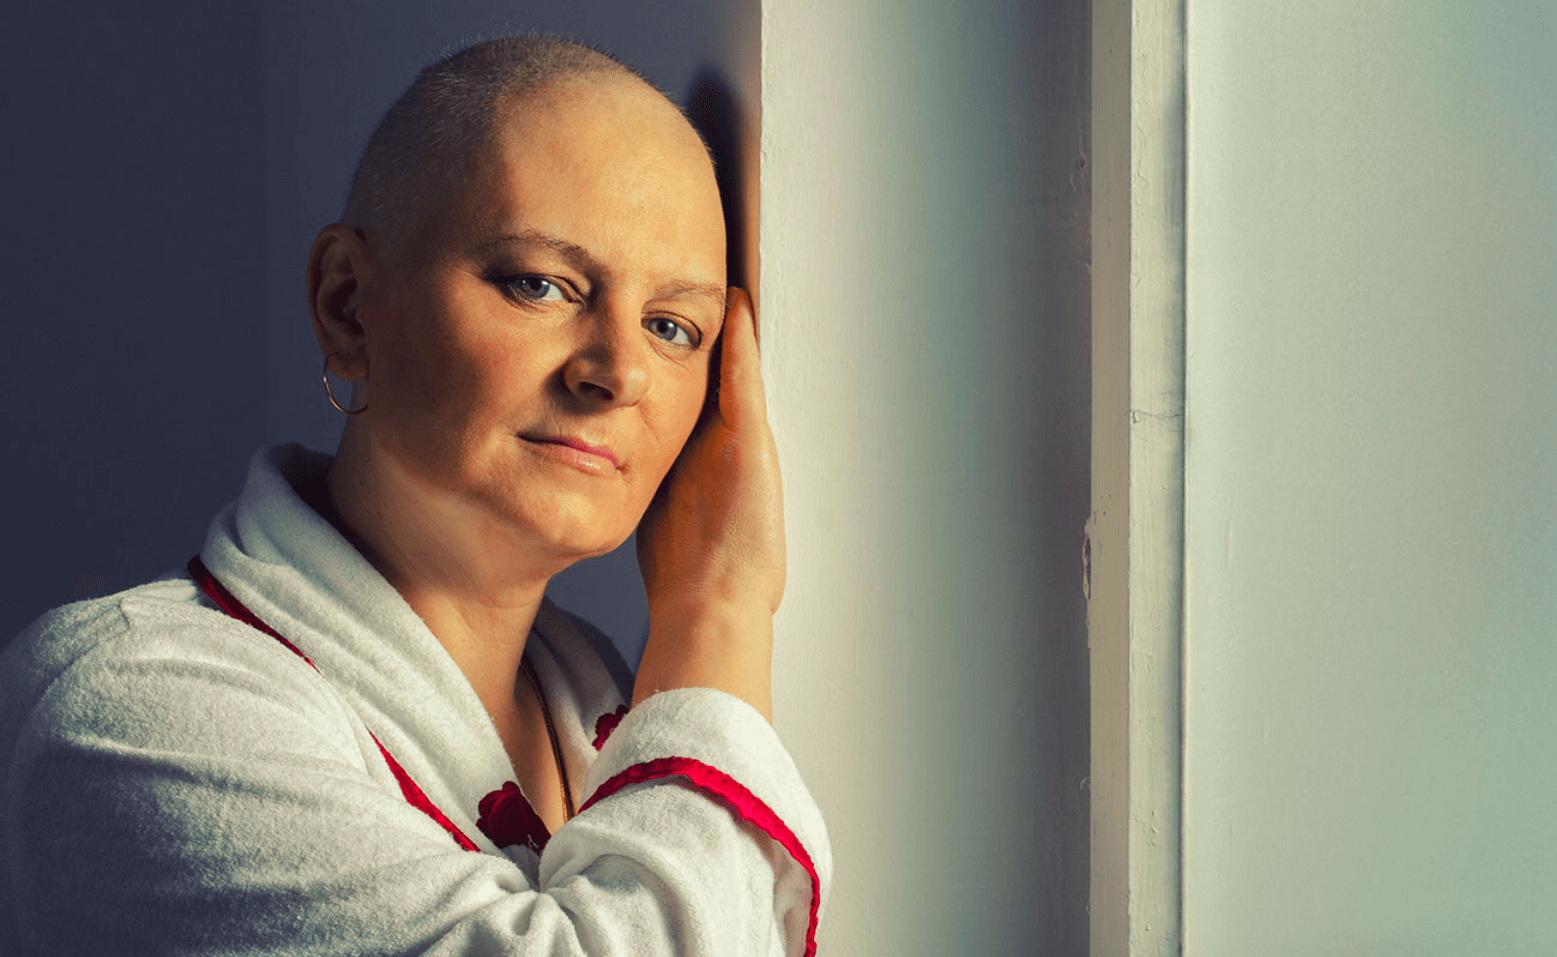 CANCER AND ITS IMPACT